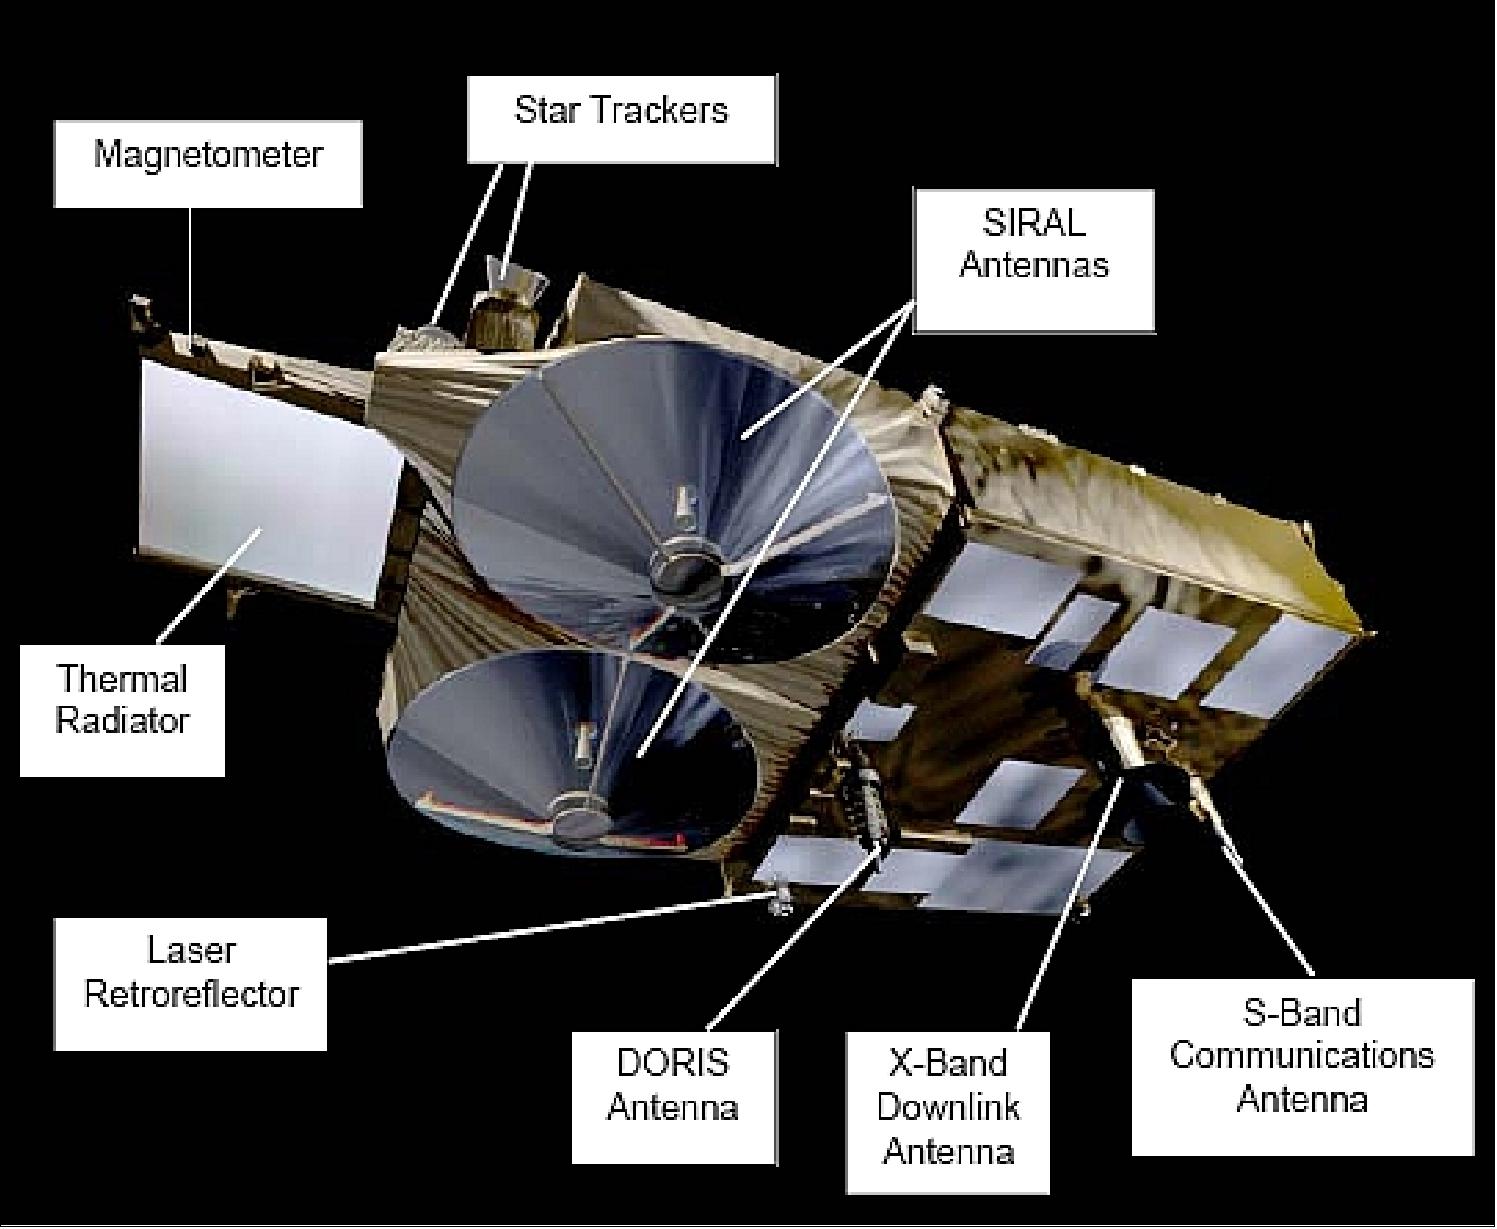 Figure 7: The CryoSat-2 spacecraft and its instruments (image credit: ESA)